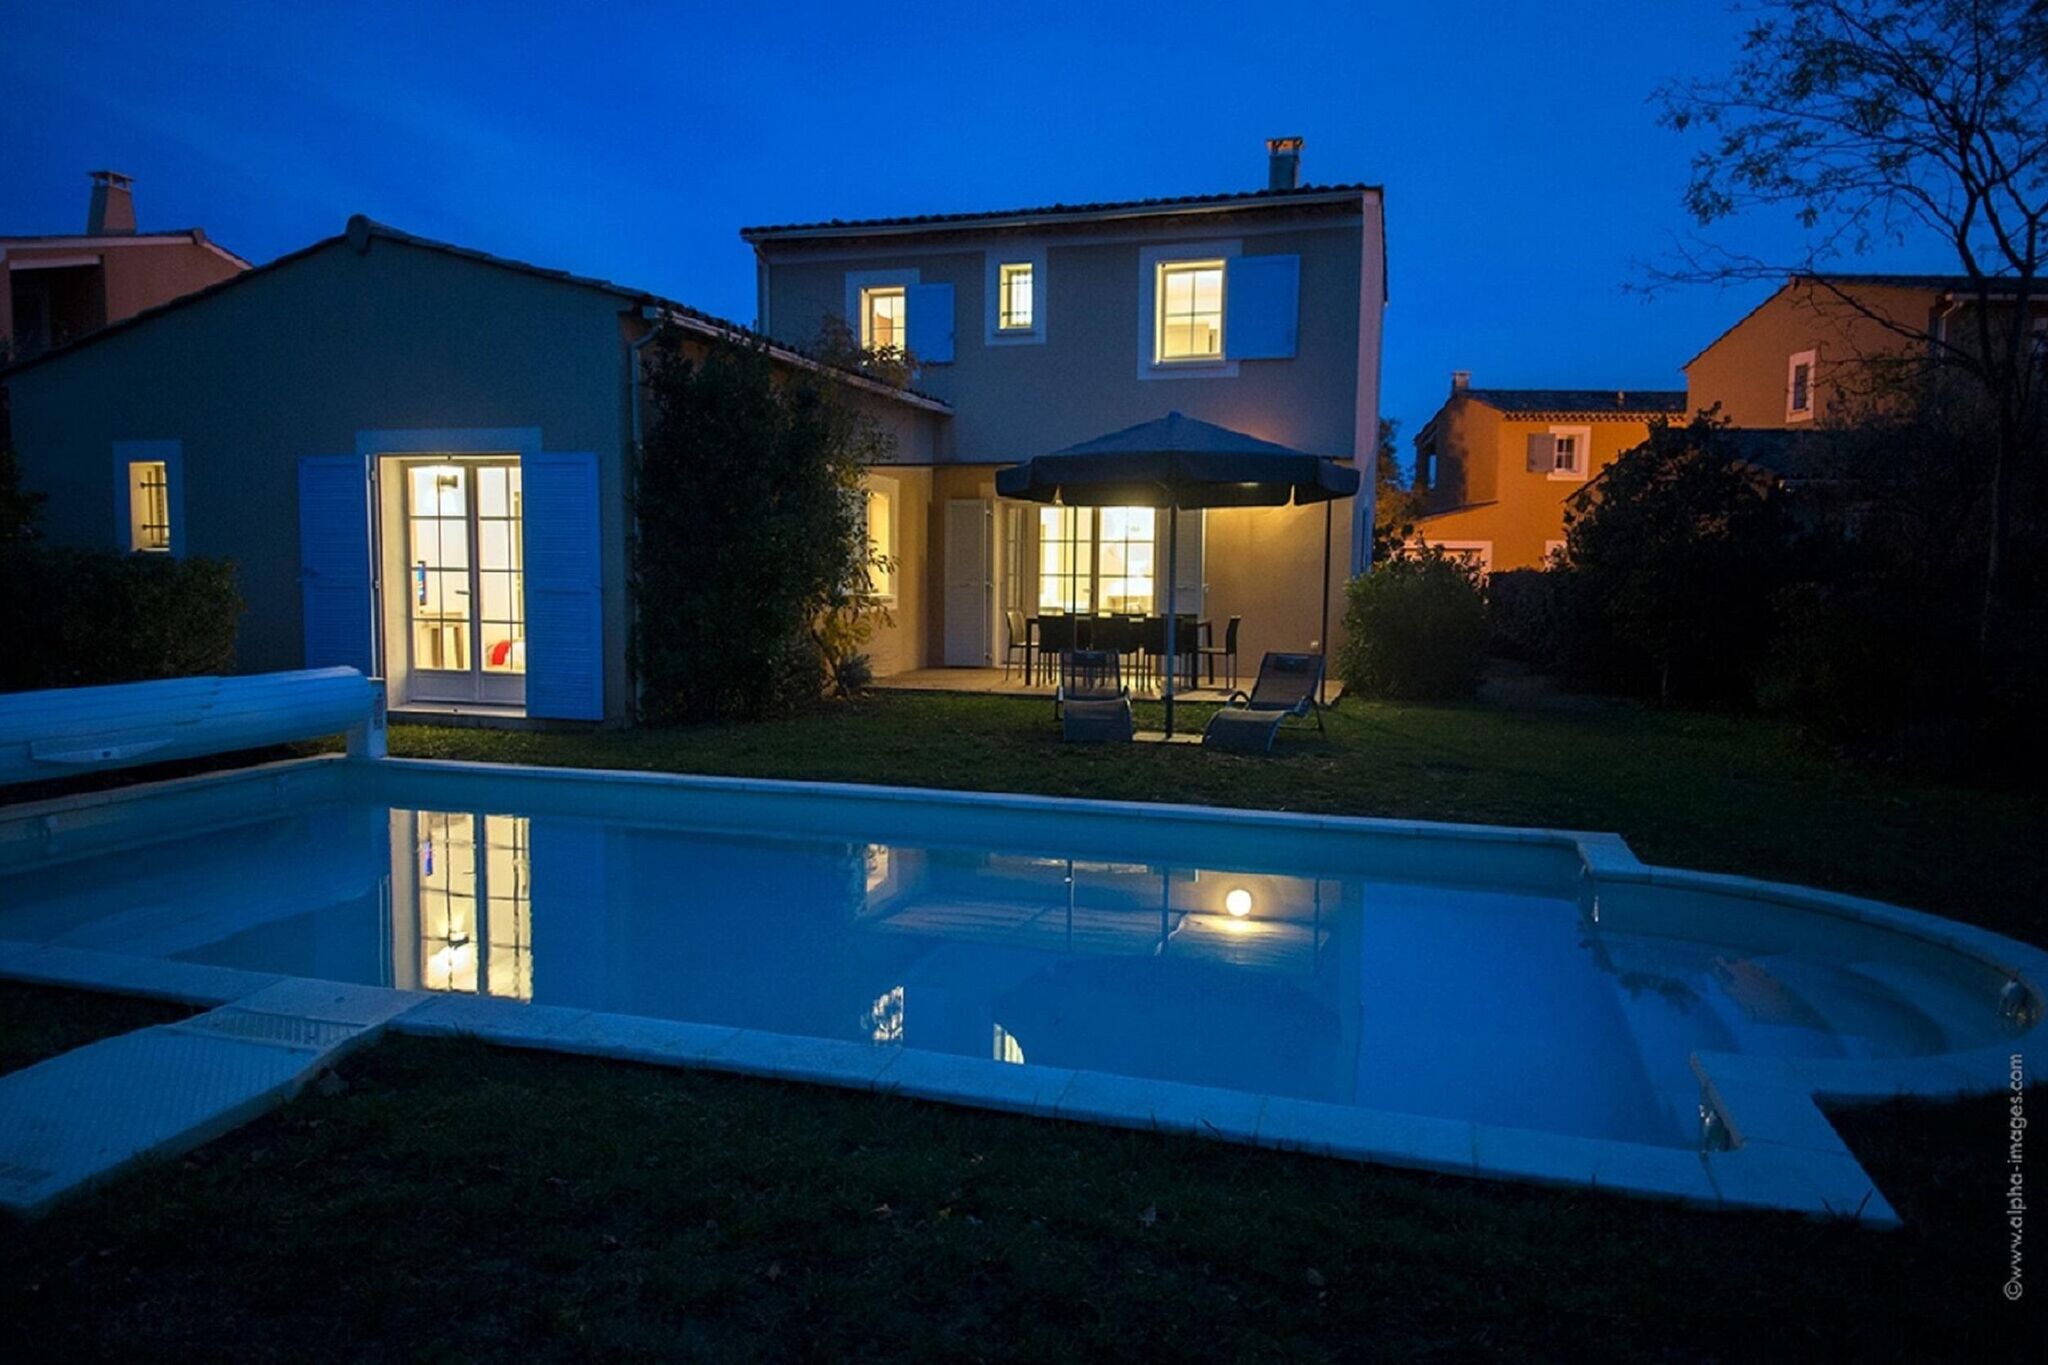 Luxury Provencal villa with pool located in St. Saturnin-les-Apt